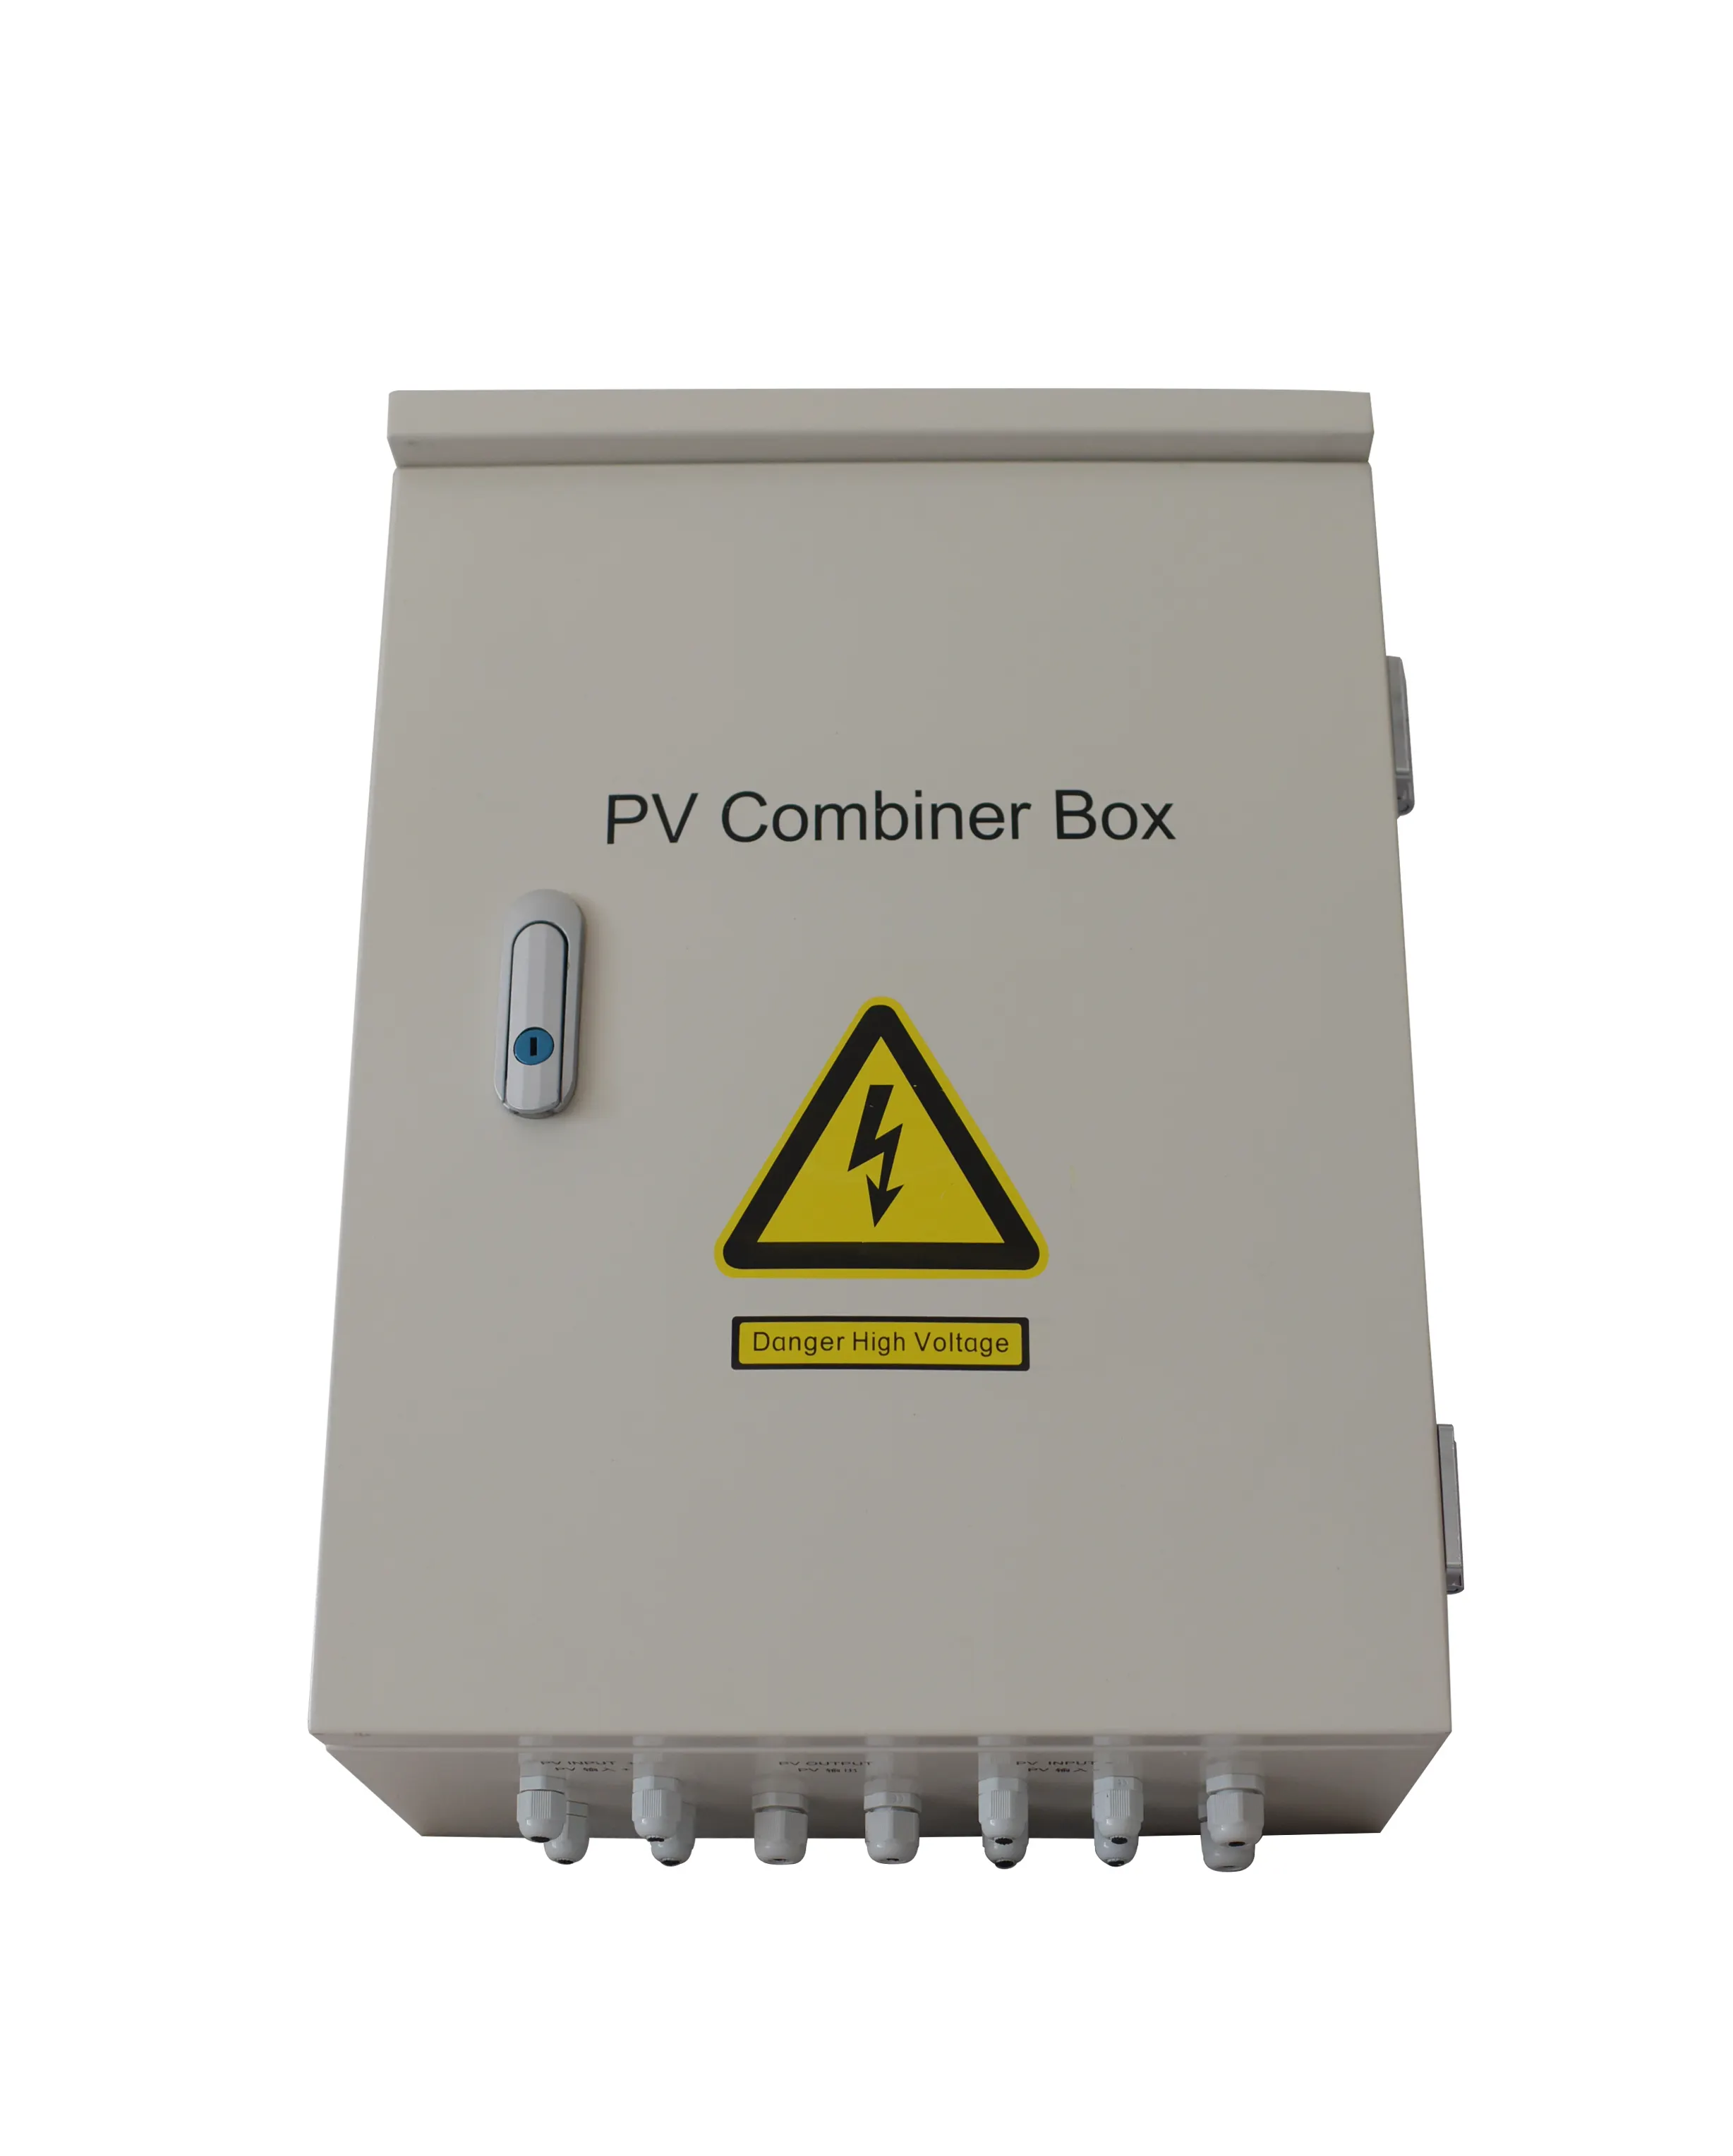 pv combiner box 8 input 1 output for solar plant